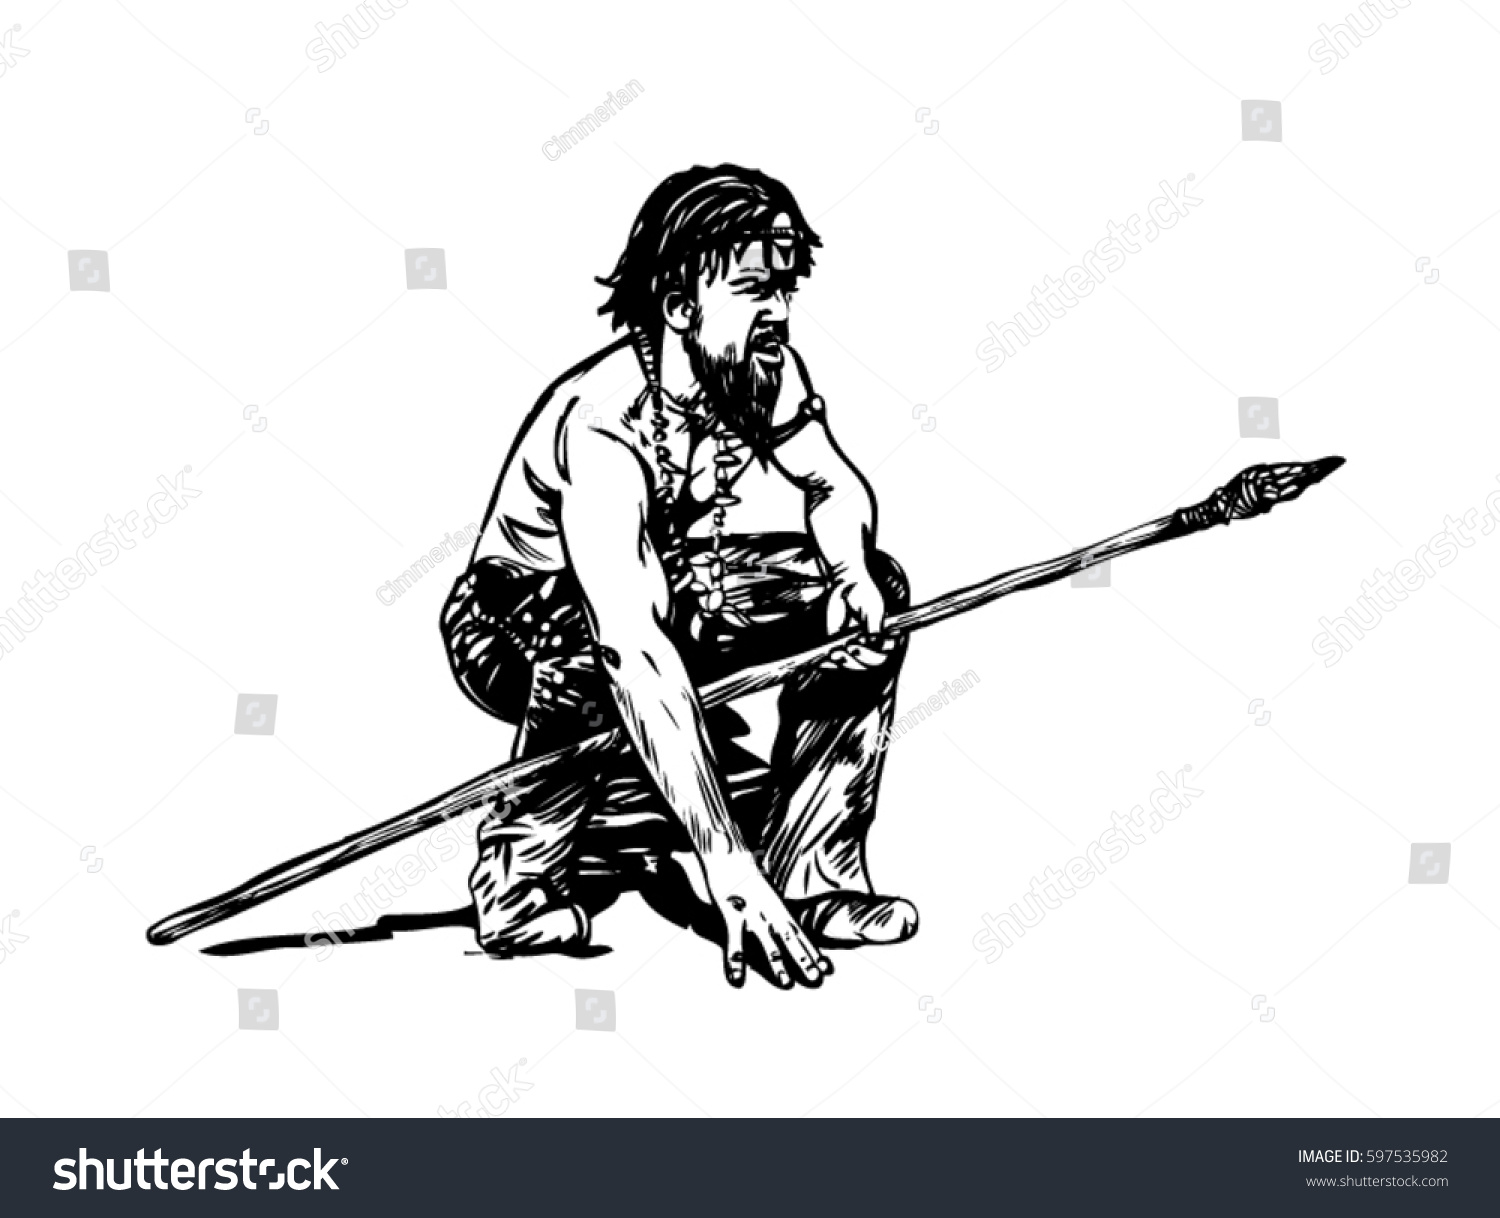 SVG of CRO-magnon, the young man (Homo sapiens). Graphics sketch. In the same portfolio there is a color image. svg